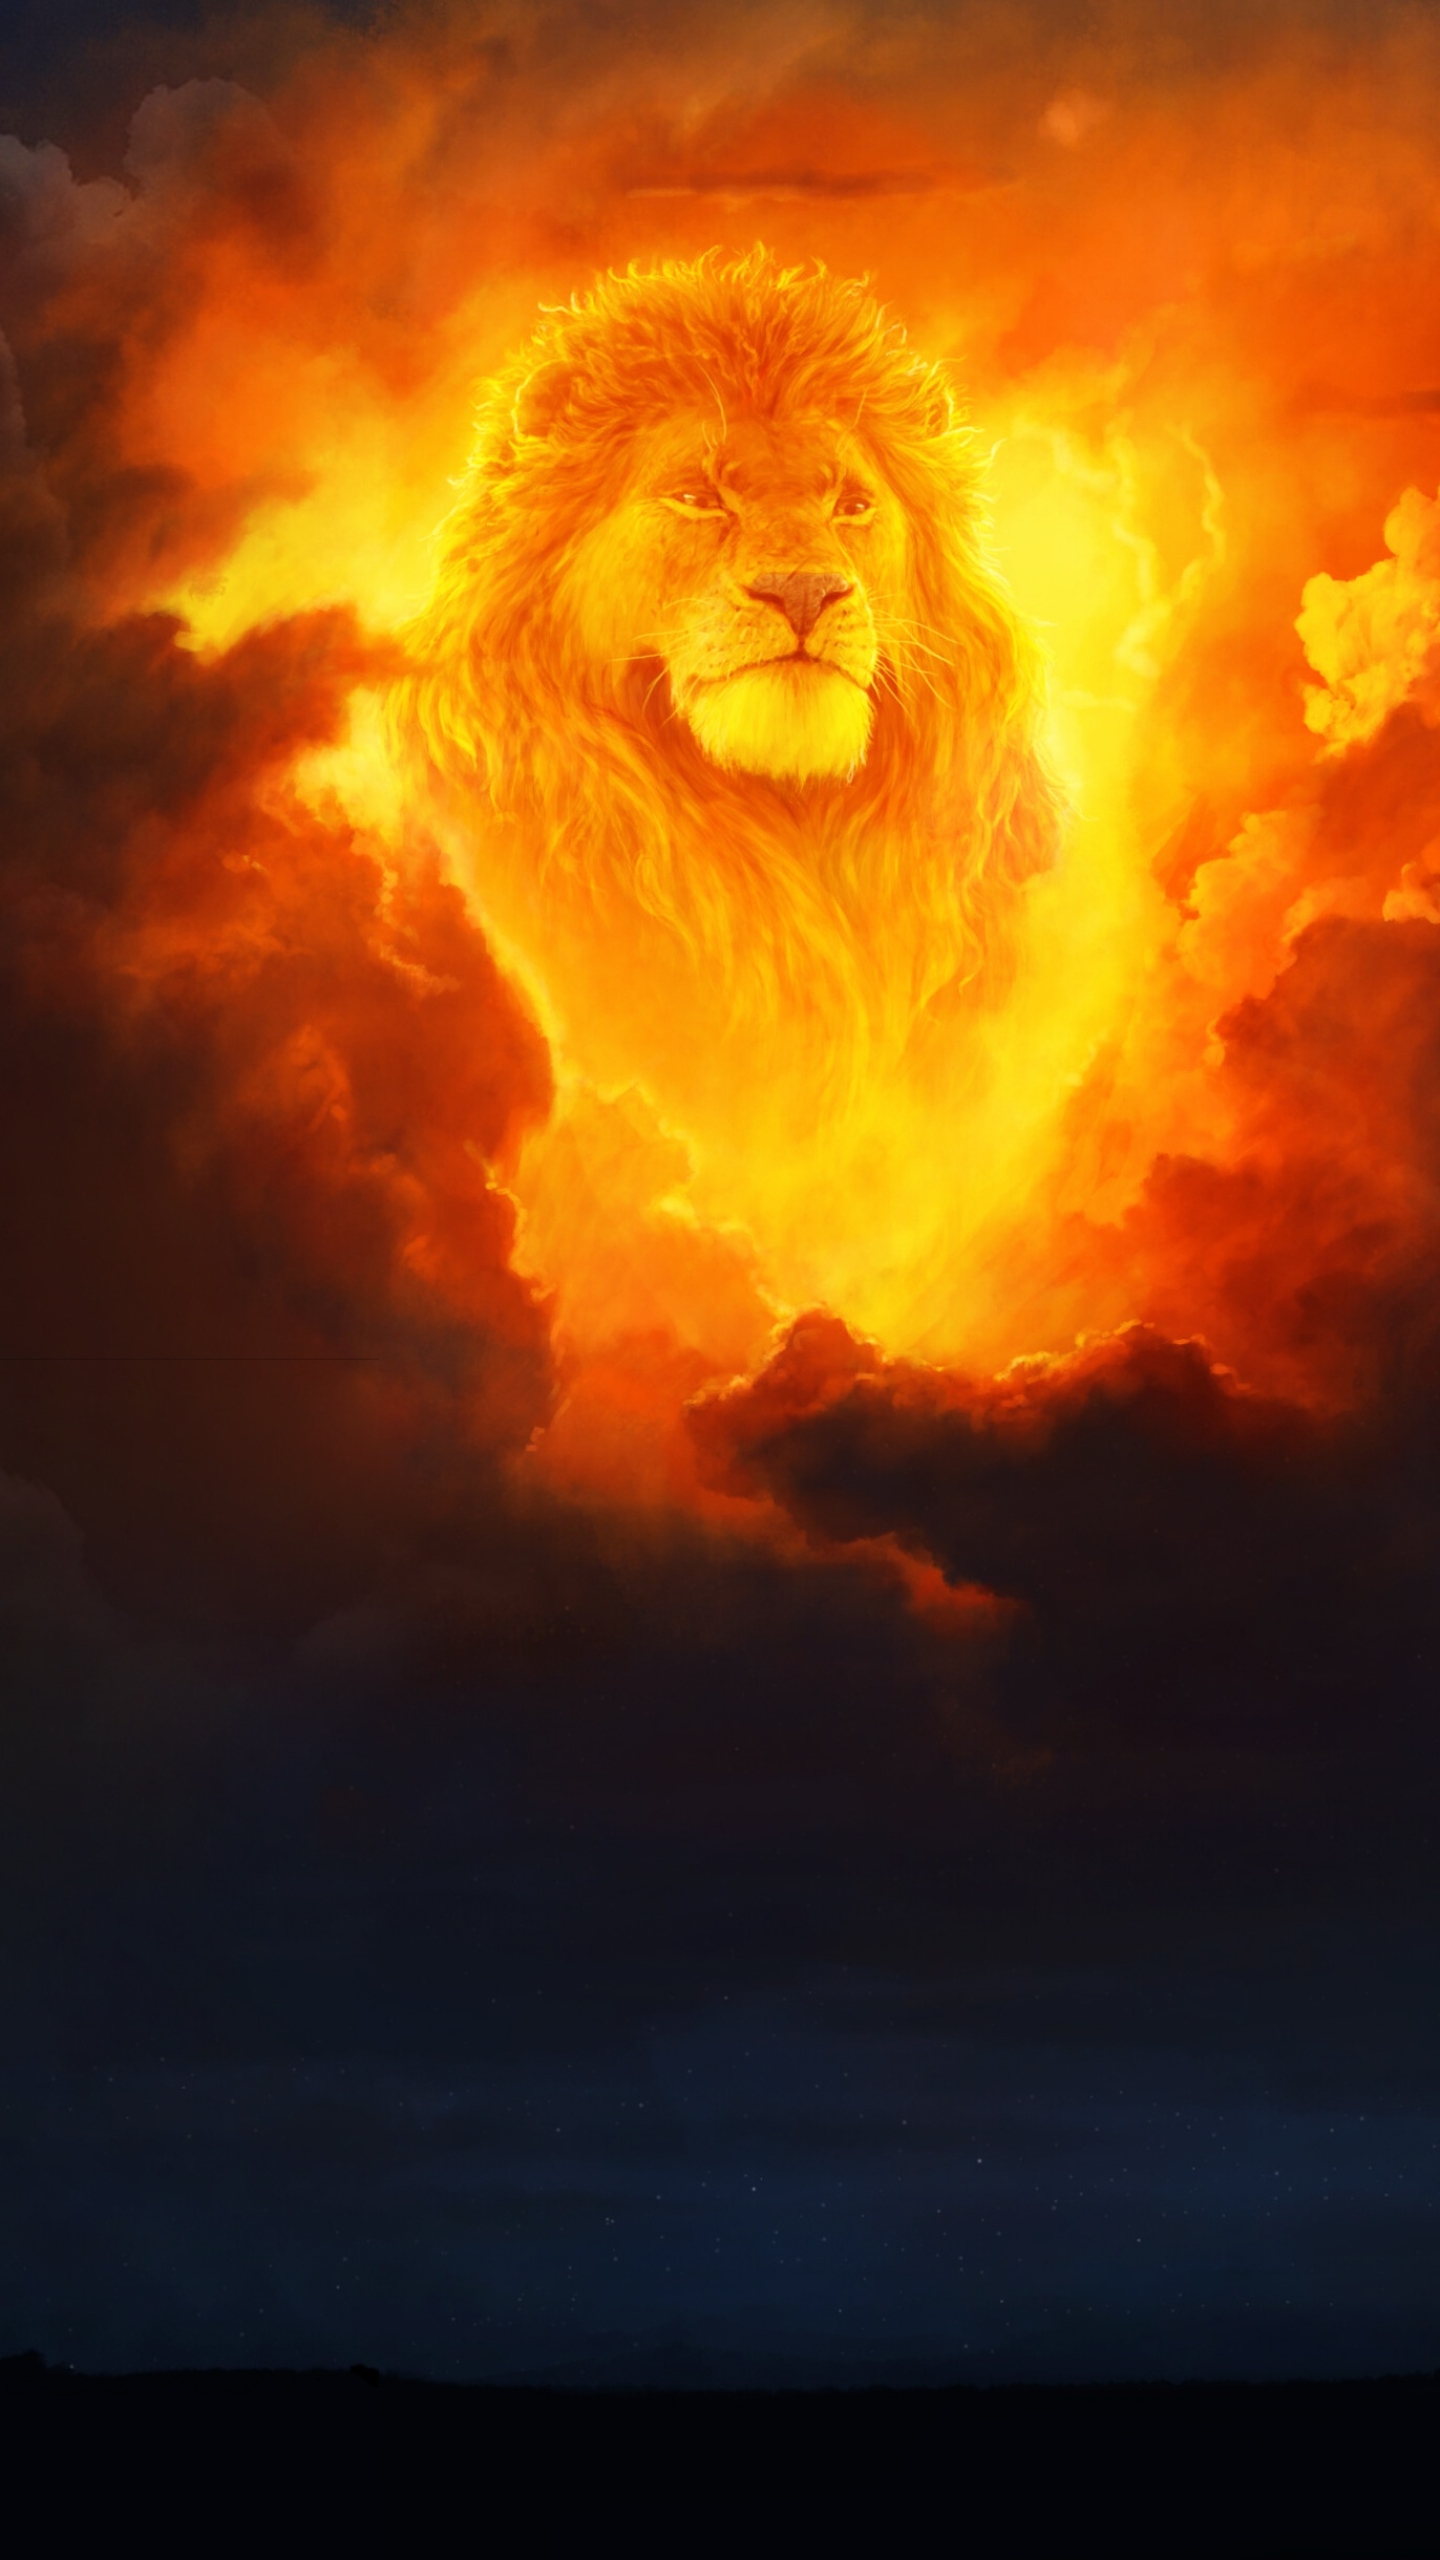 movie, the lion king (1994), the lion king, mufasa (the lion king), cloud